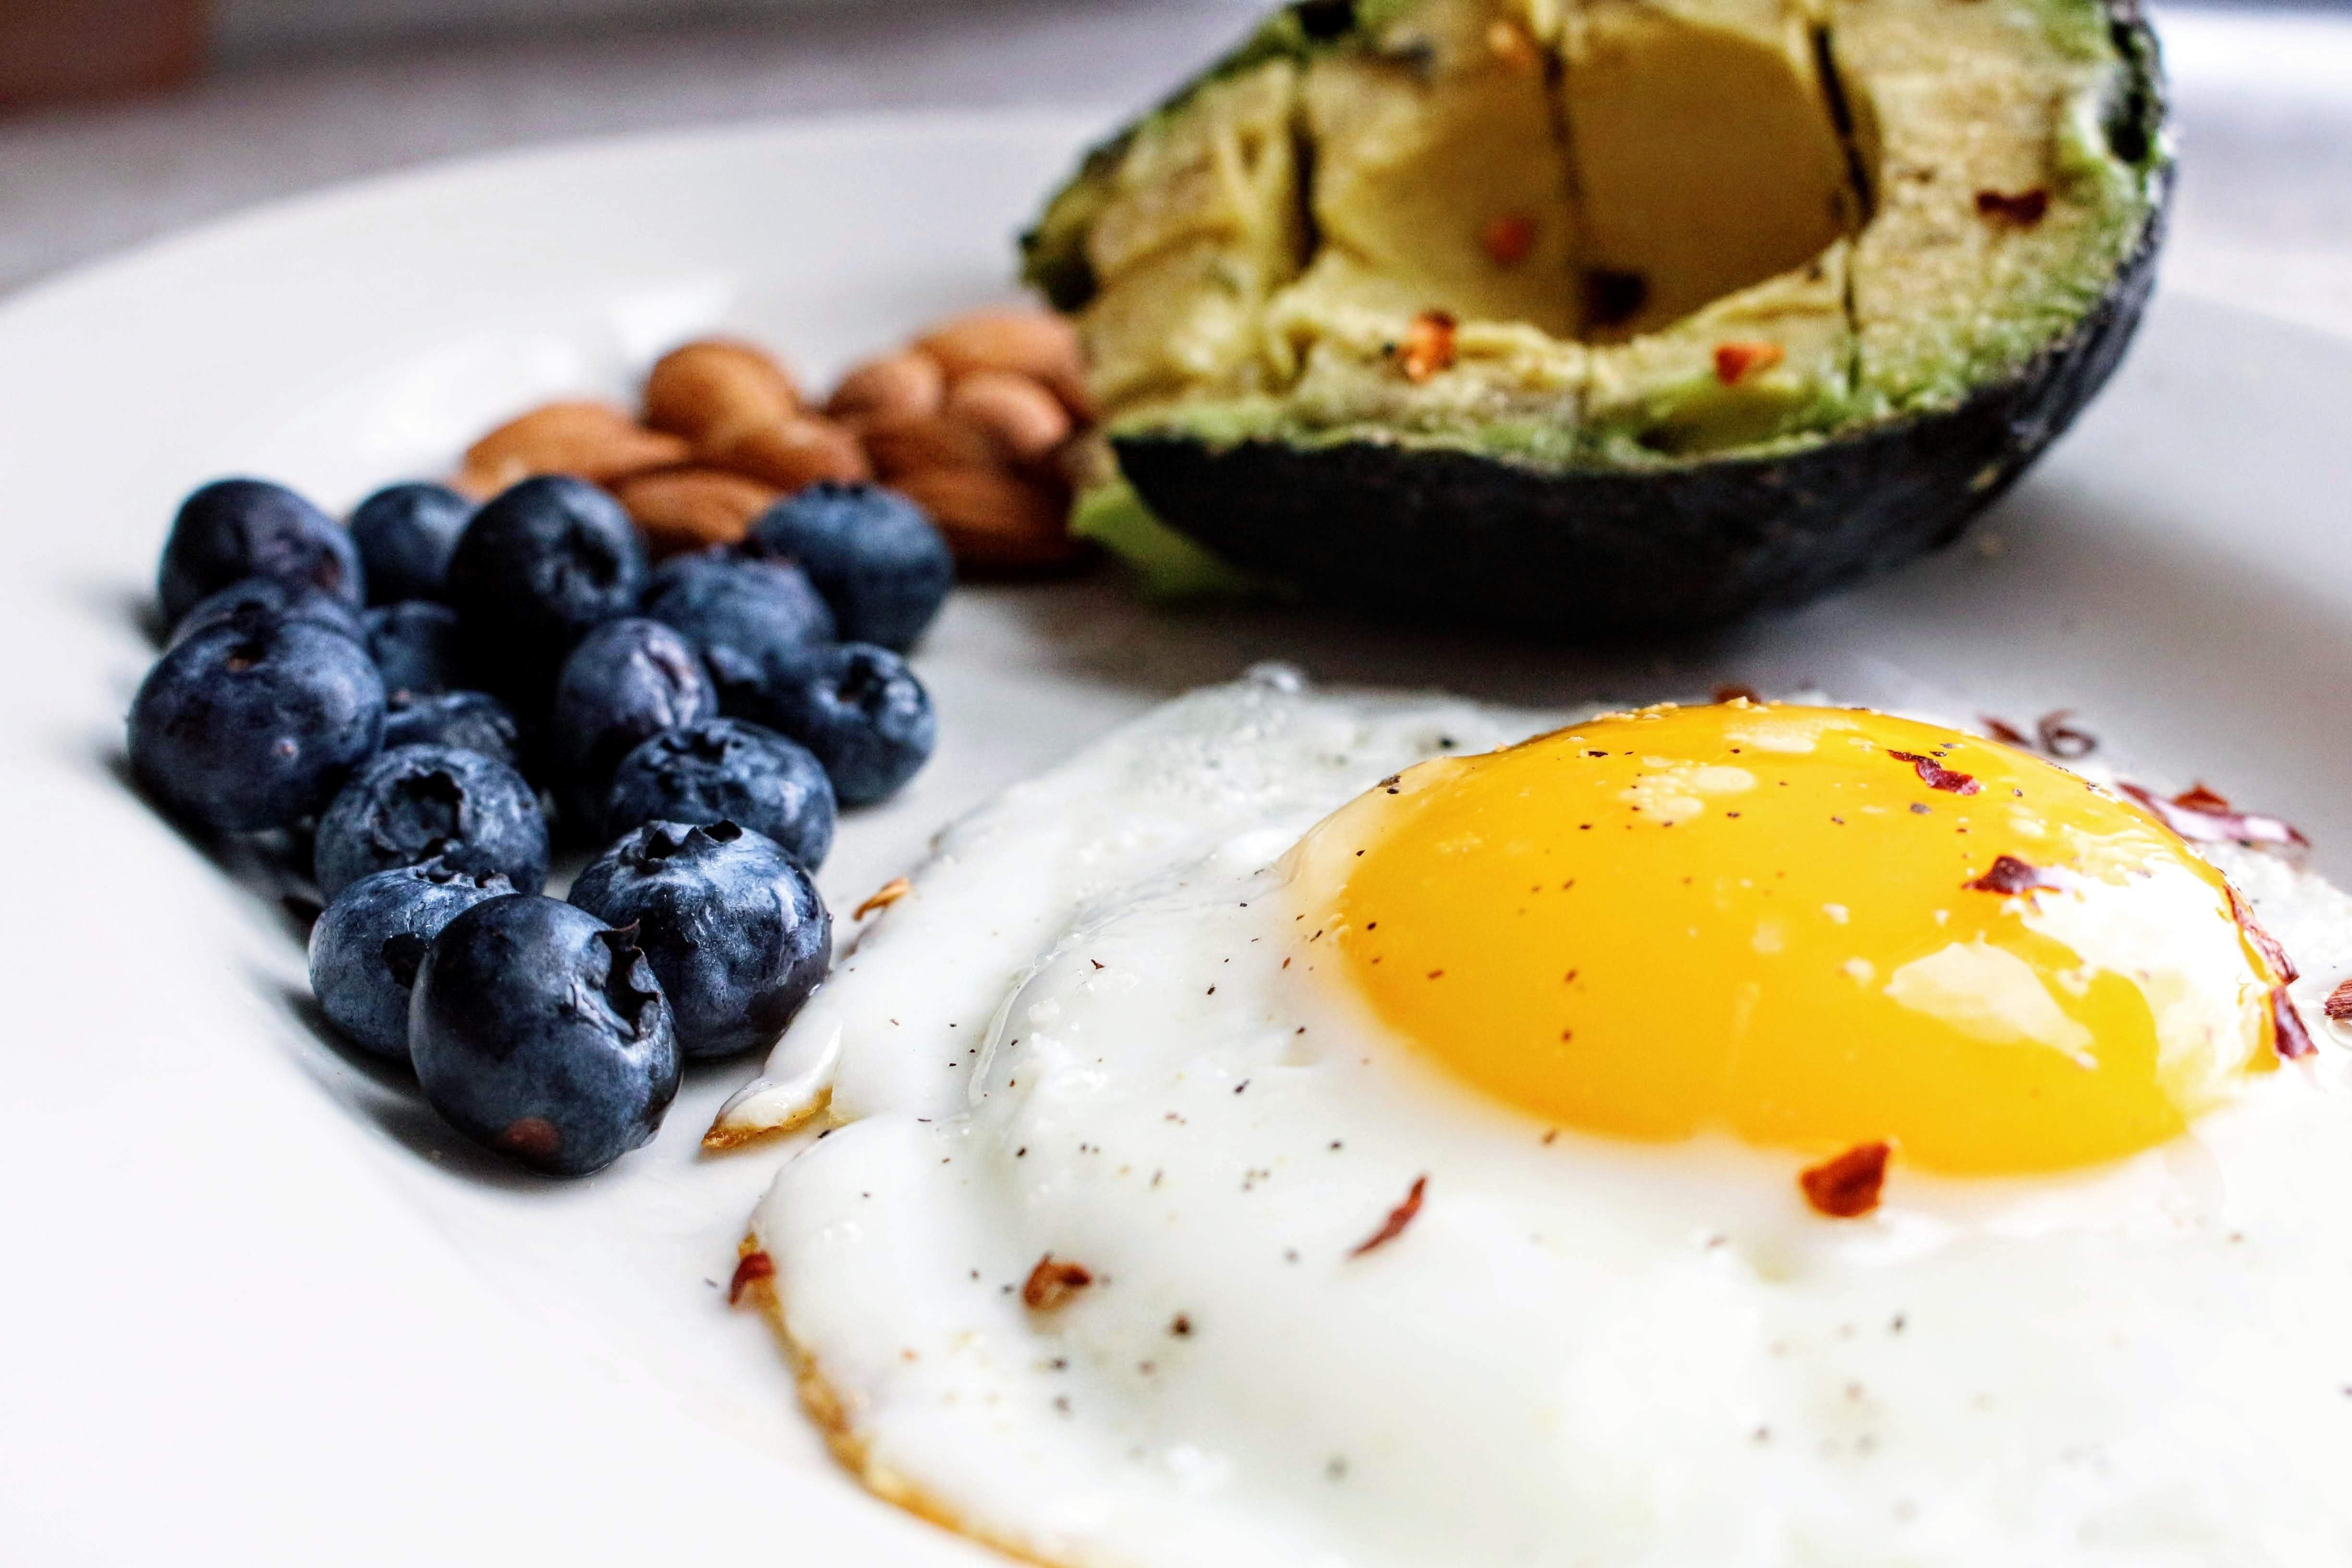 Can a keto diet help you lose weight?